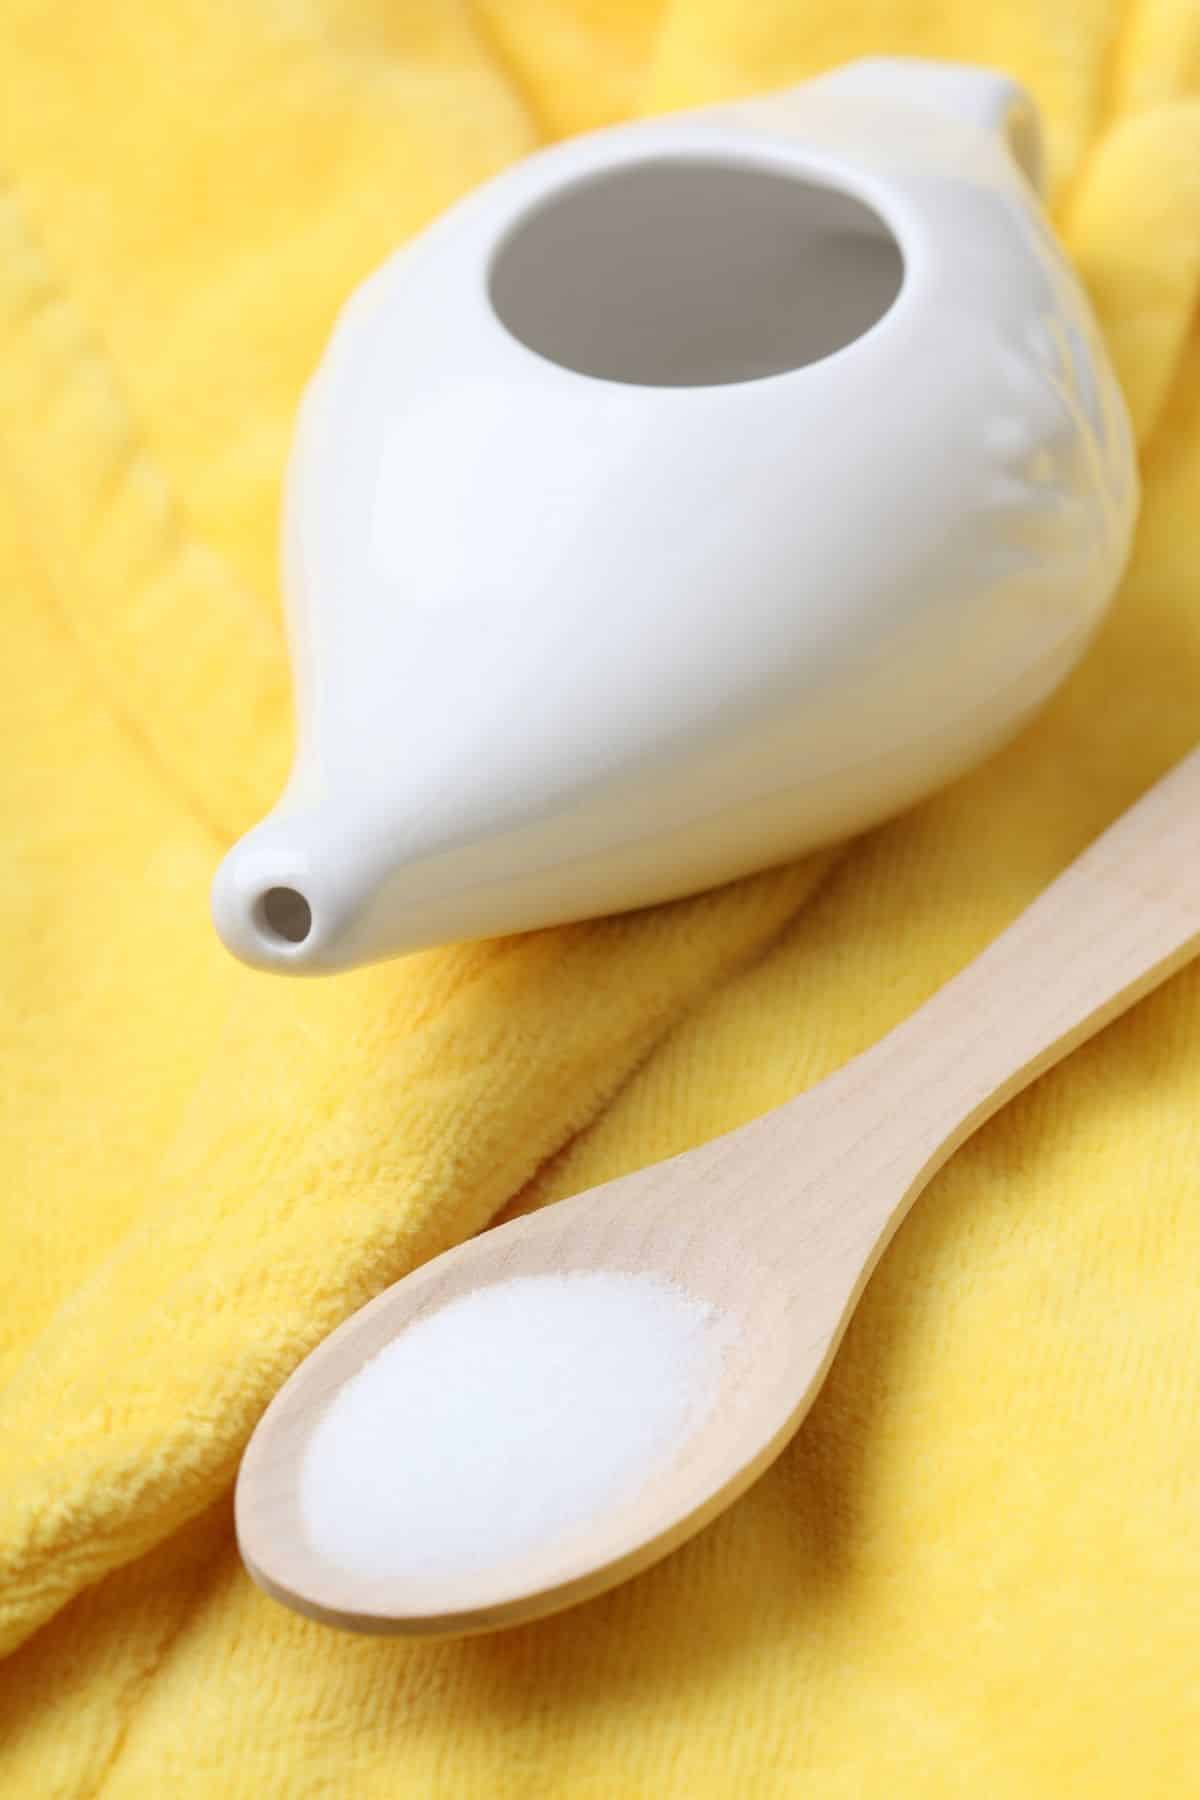 neti pot on a table with a spoonful of salt.